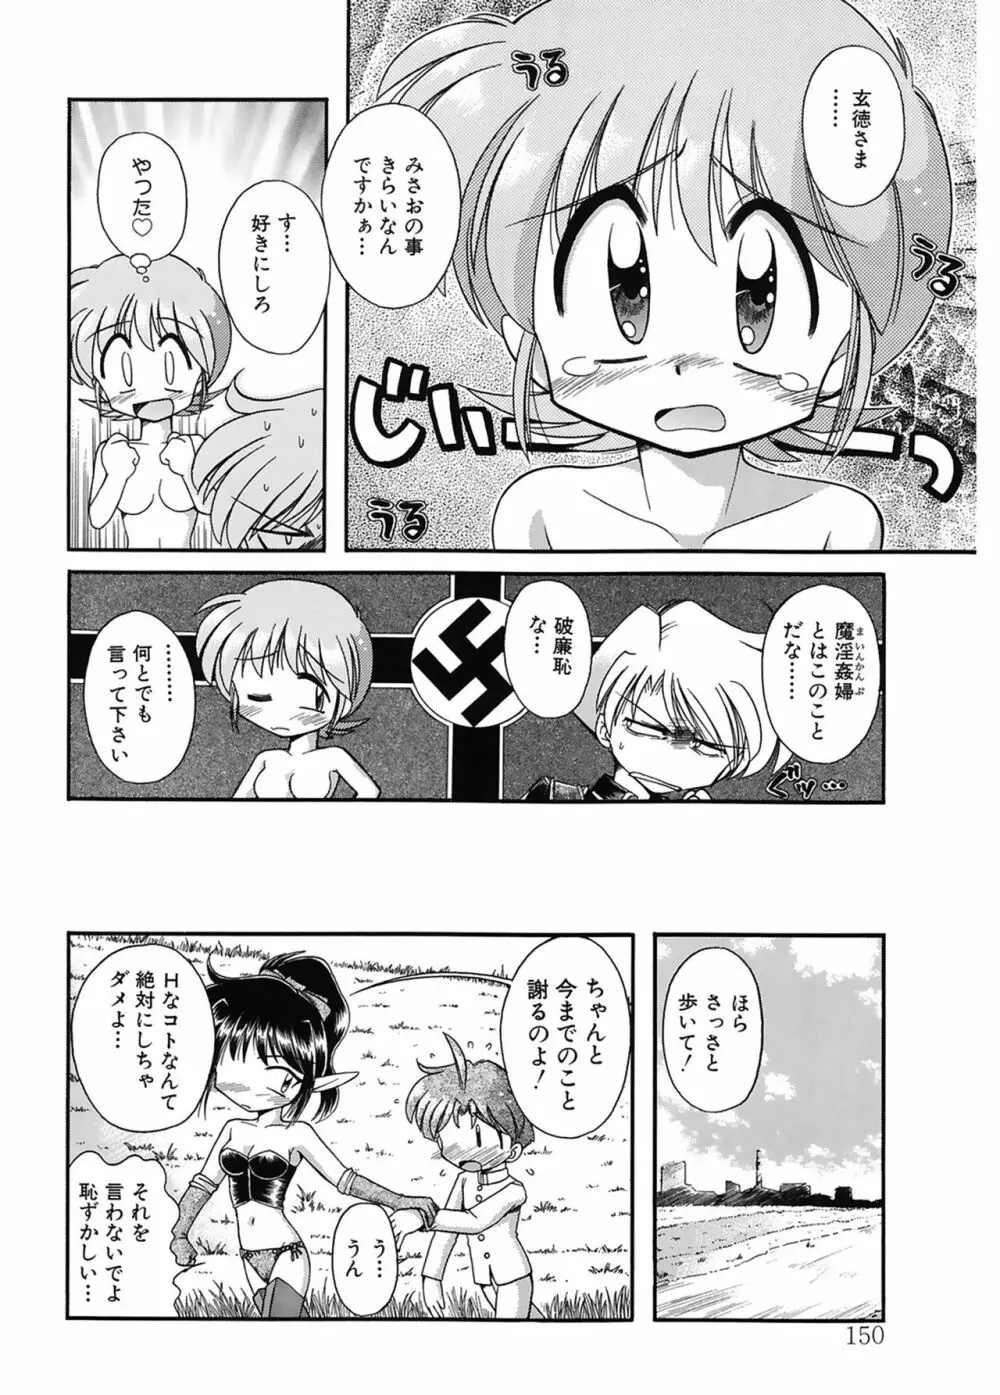 JACK UP featuring徳川玄徳 Page.150